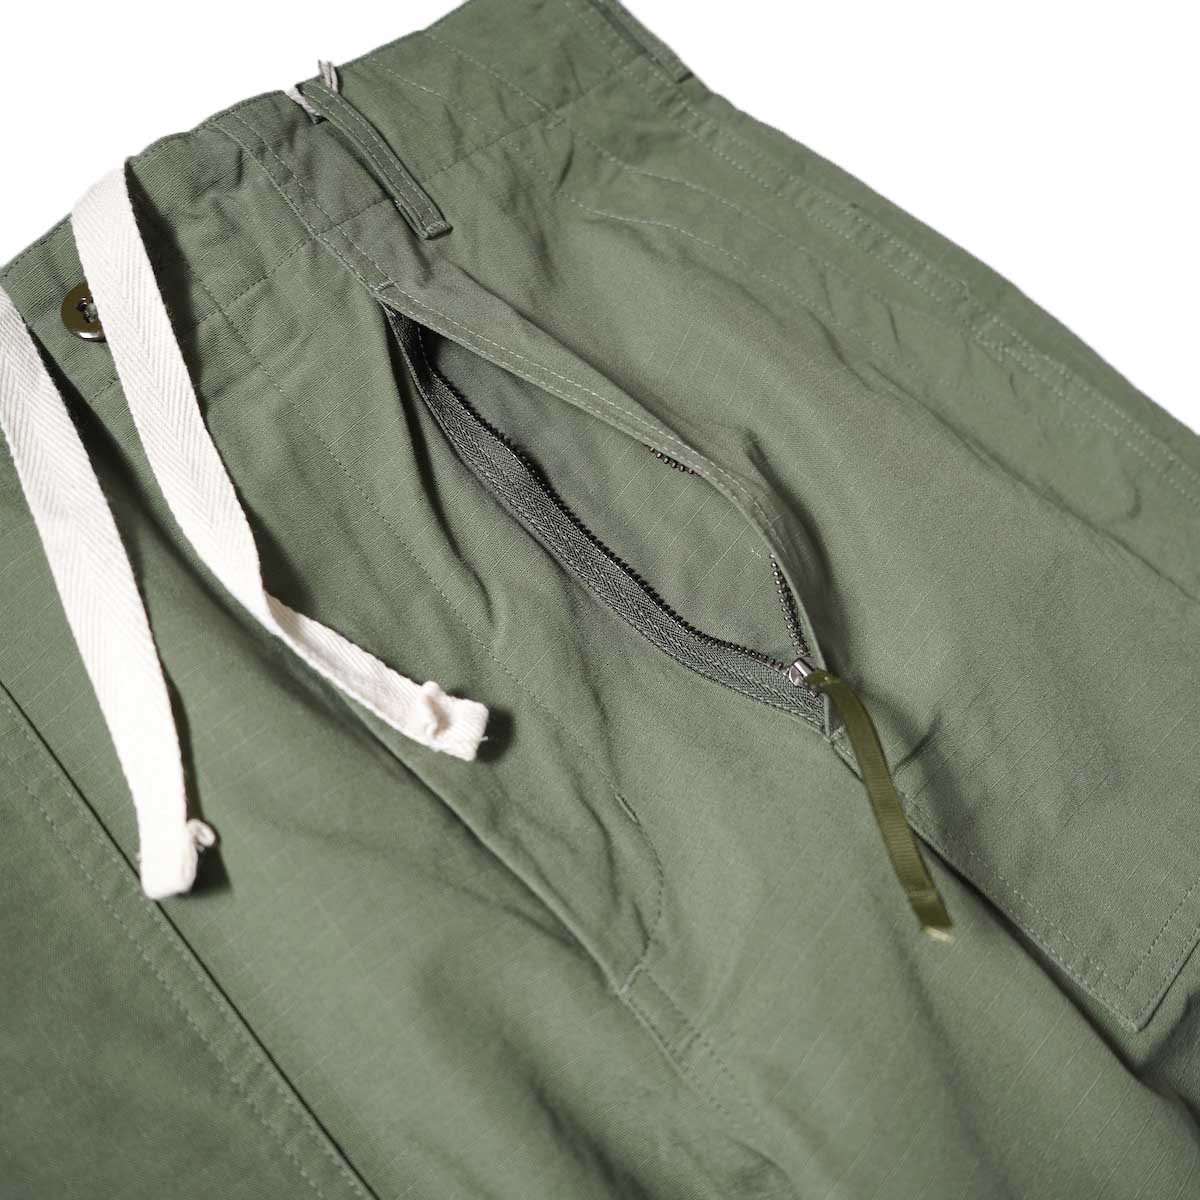 ENGINEERED GARMENTS / FATIGUE PANTS - Cotton Ripstop (Olive)ポケット